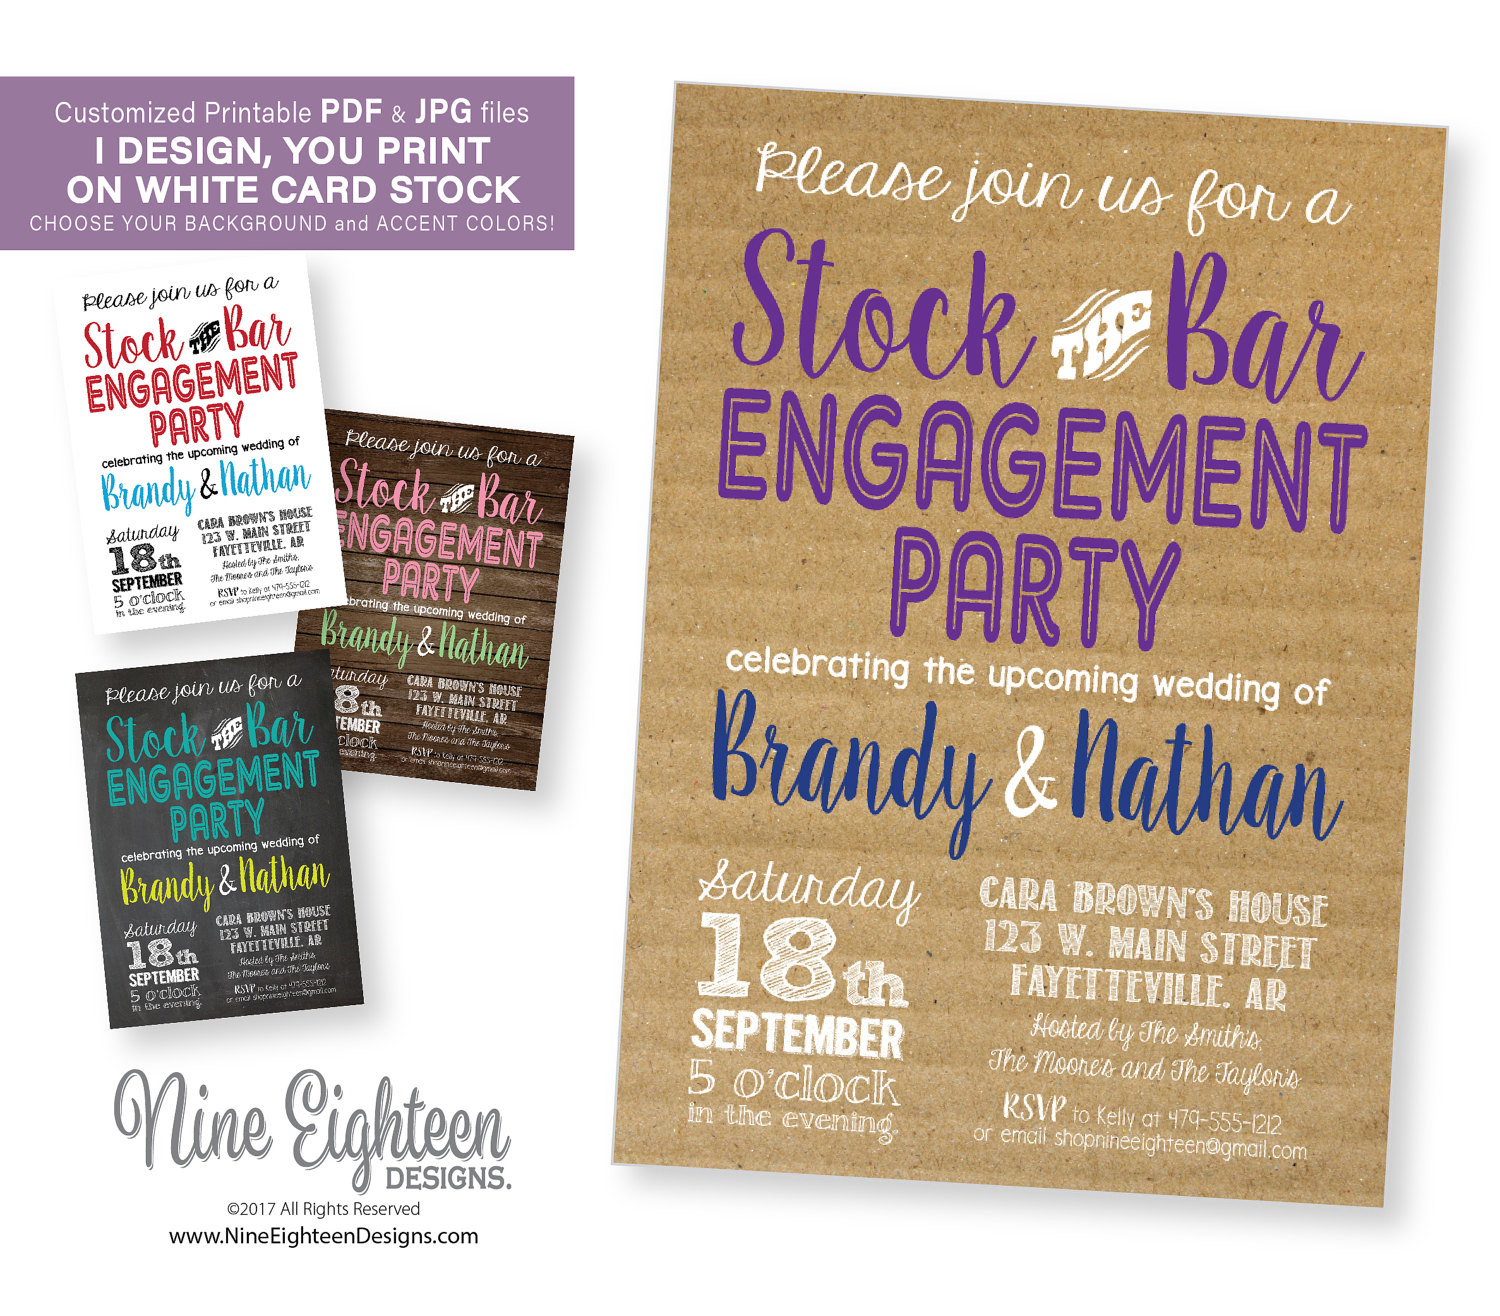 Stock The Bar Engagement Party Ideas
 Engagement Party INVITATION Stock the Bar Party Customized